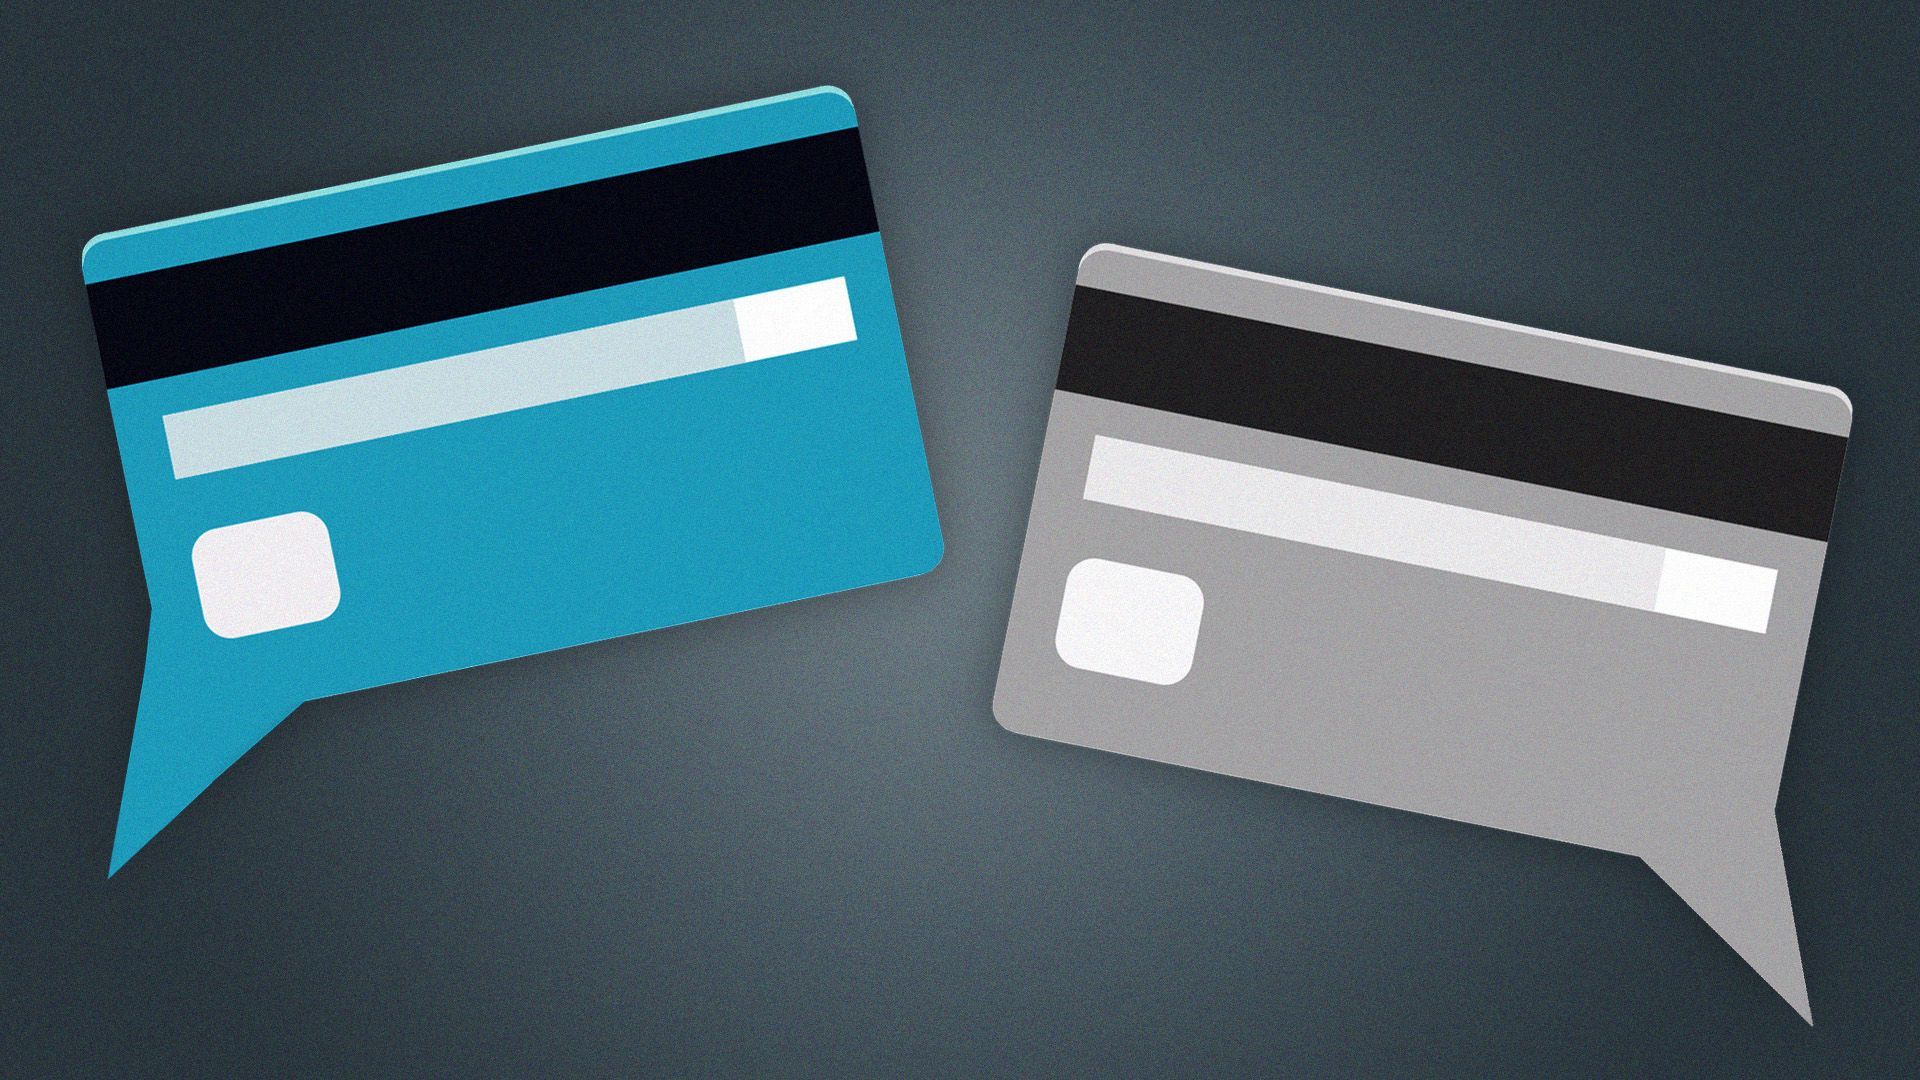 an illustration of two credit cards stylized as speech bubbles